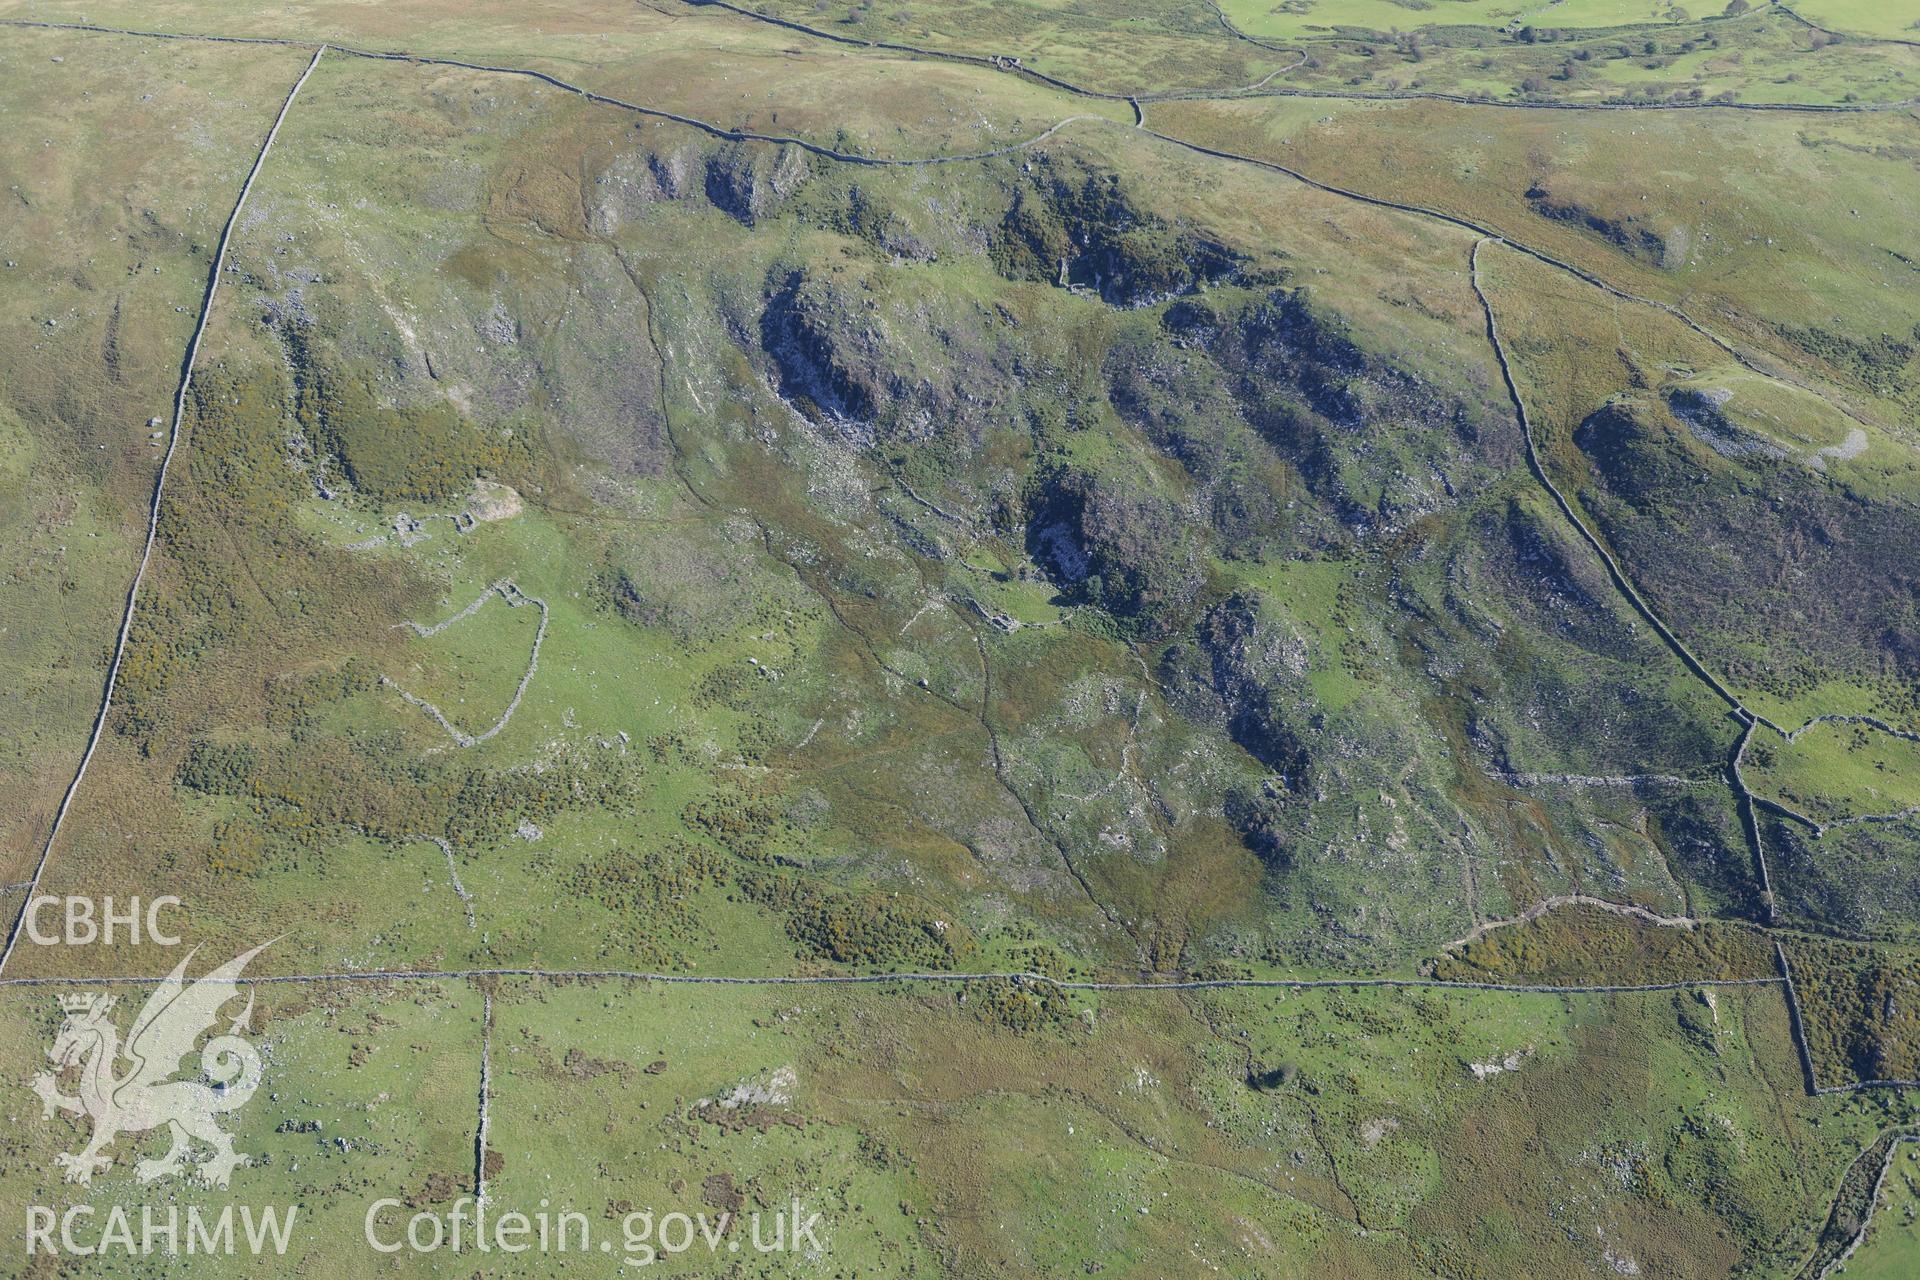 Bryn Castell hillfort and an enclosure or settlement north east of Caerau, near Barmouth. Oblique aerial photograph taken during the Royal Commission's programme of archaeological aerial reconnaissance by Toby Driver on 2nd October 2015.